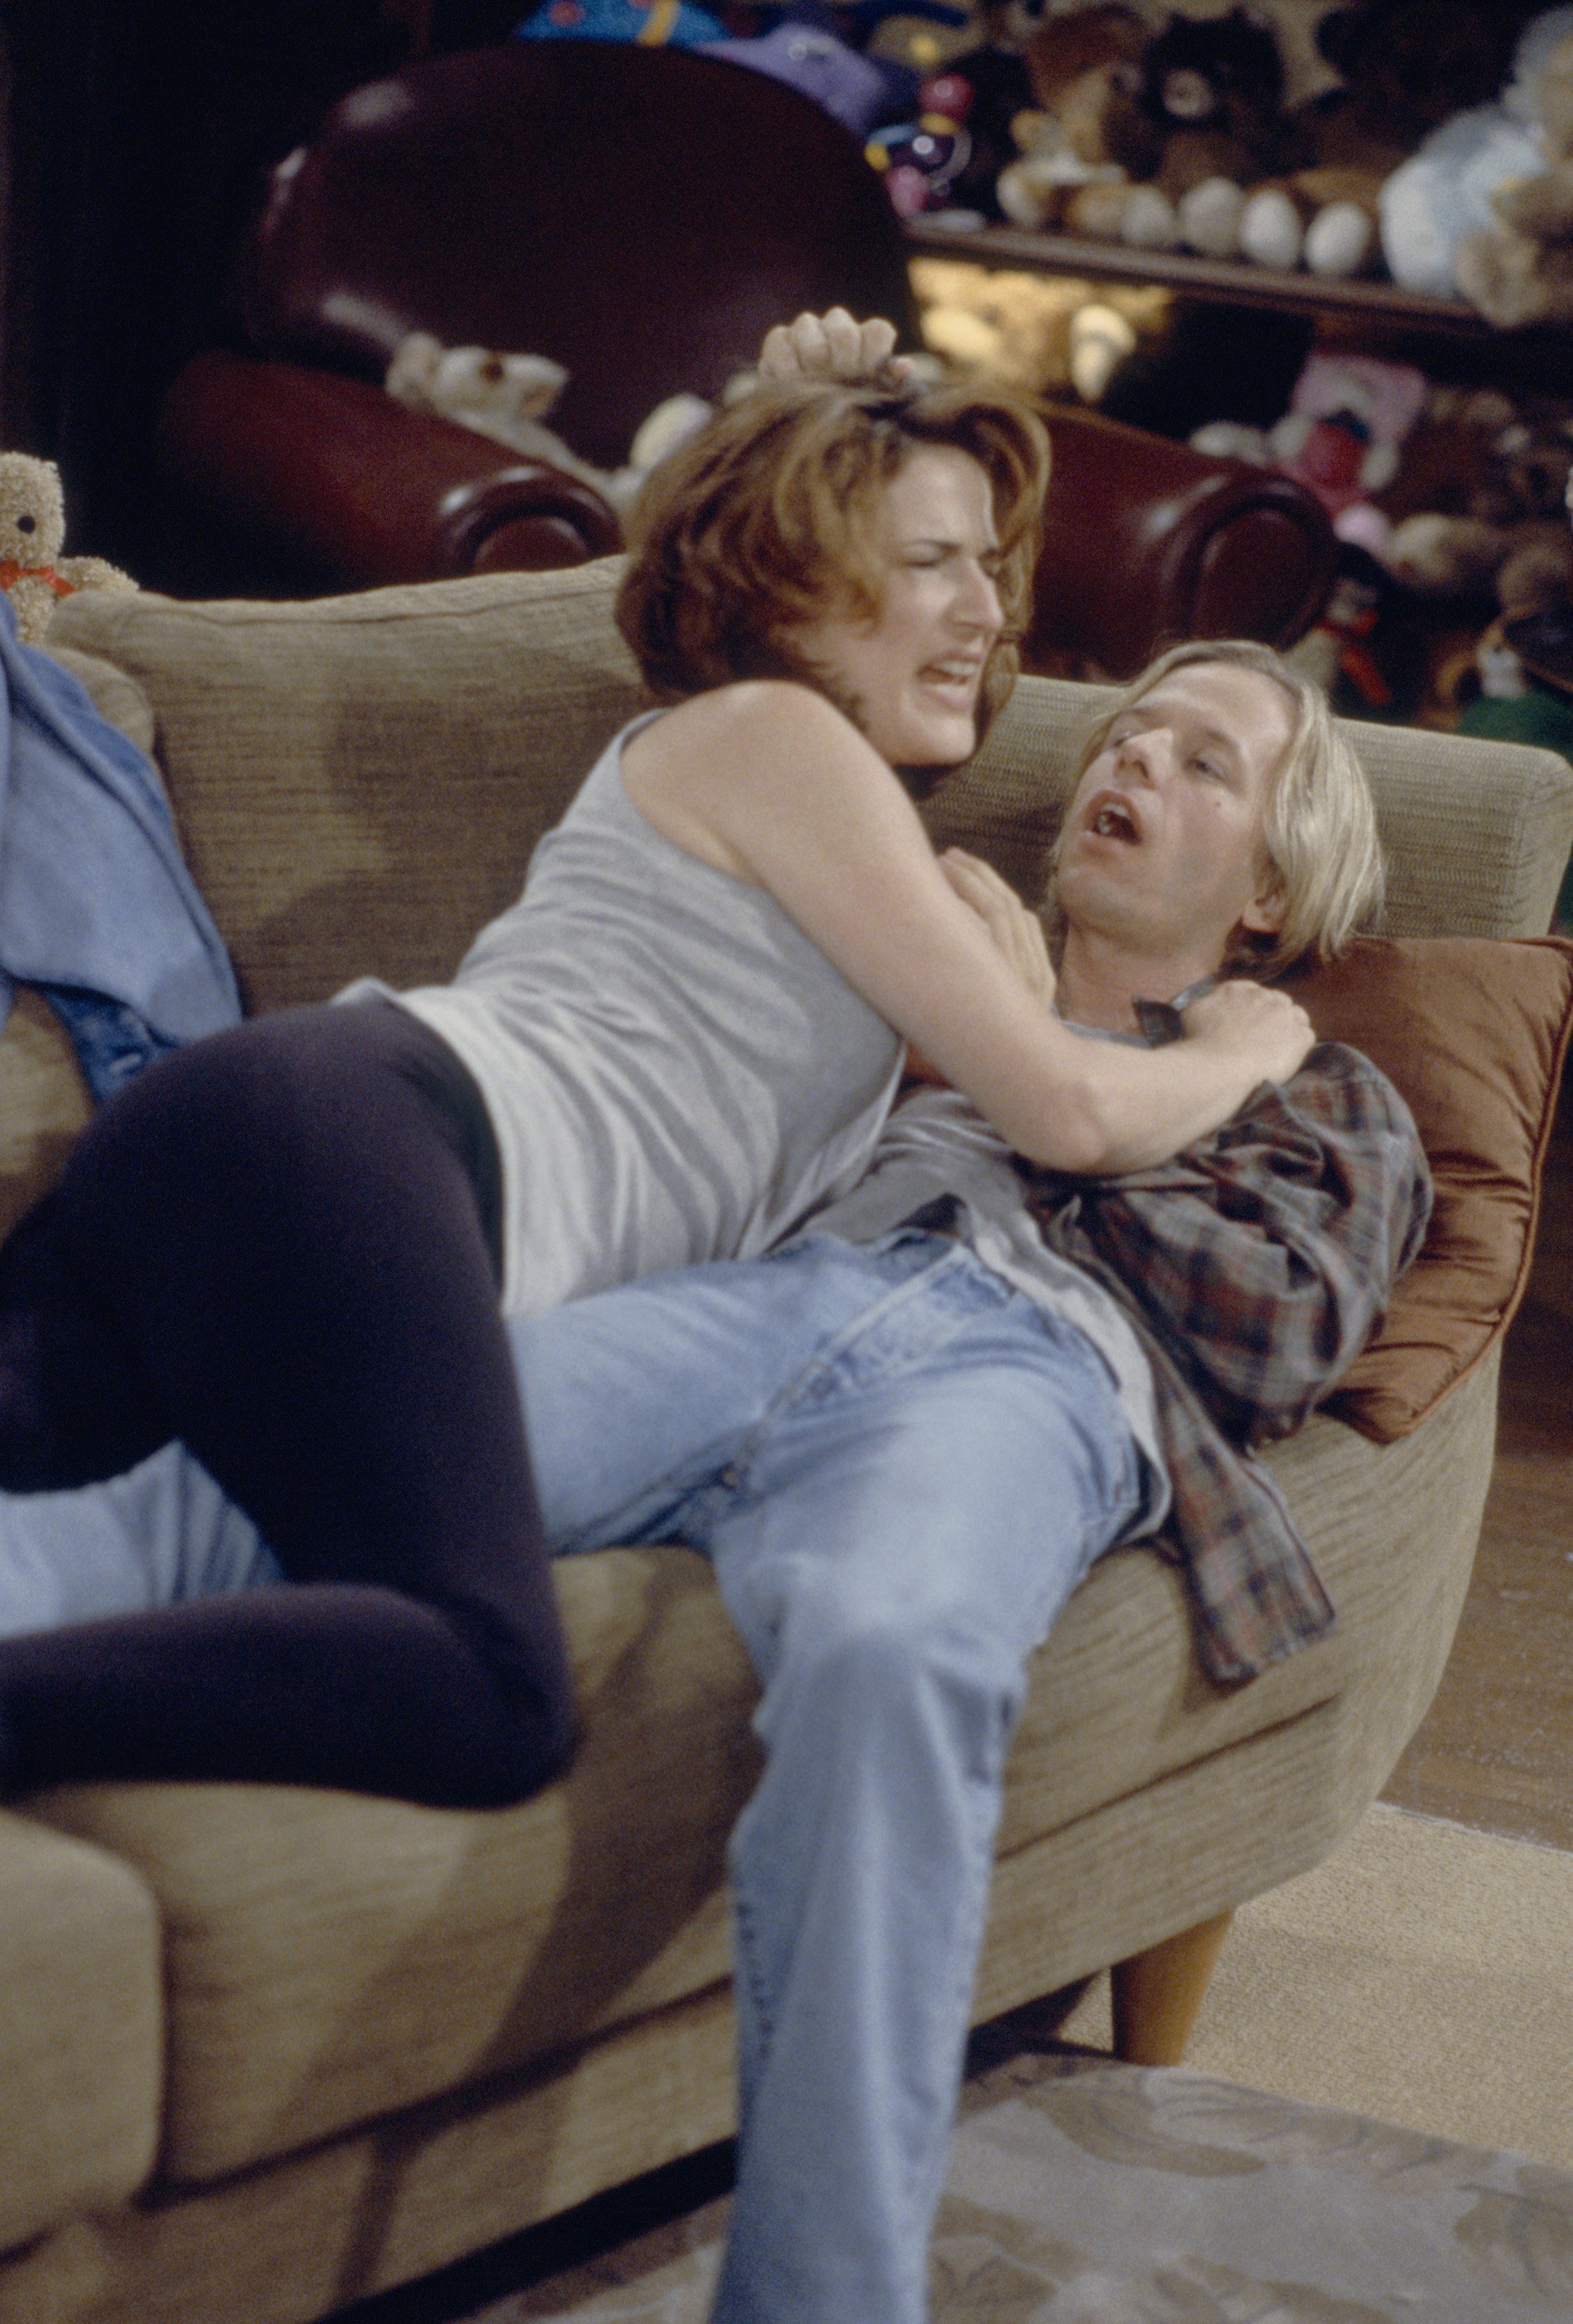 Still of David Spade and Ana Gasteyer in Just Shoot Me! (1997)